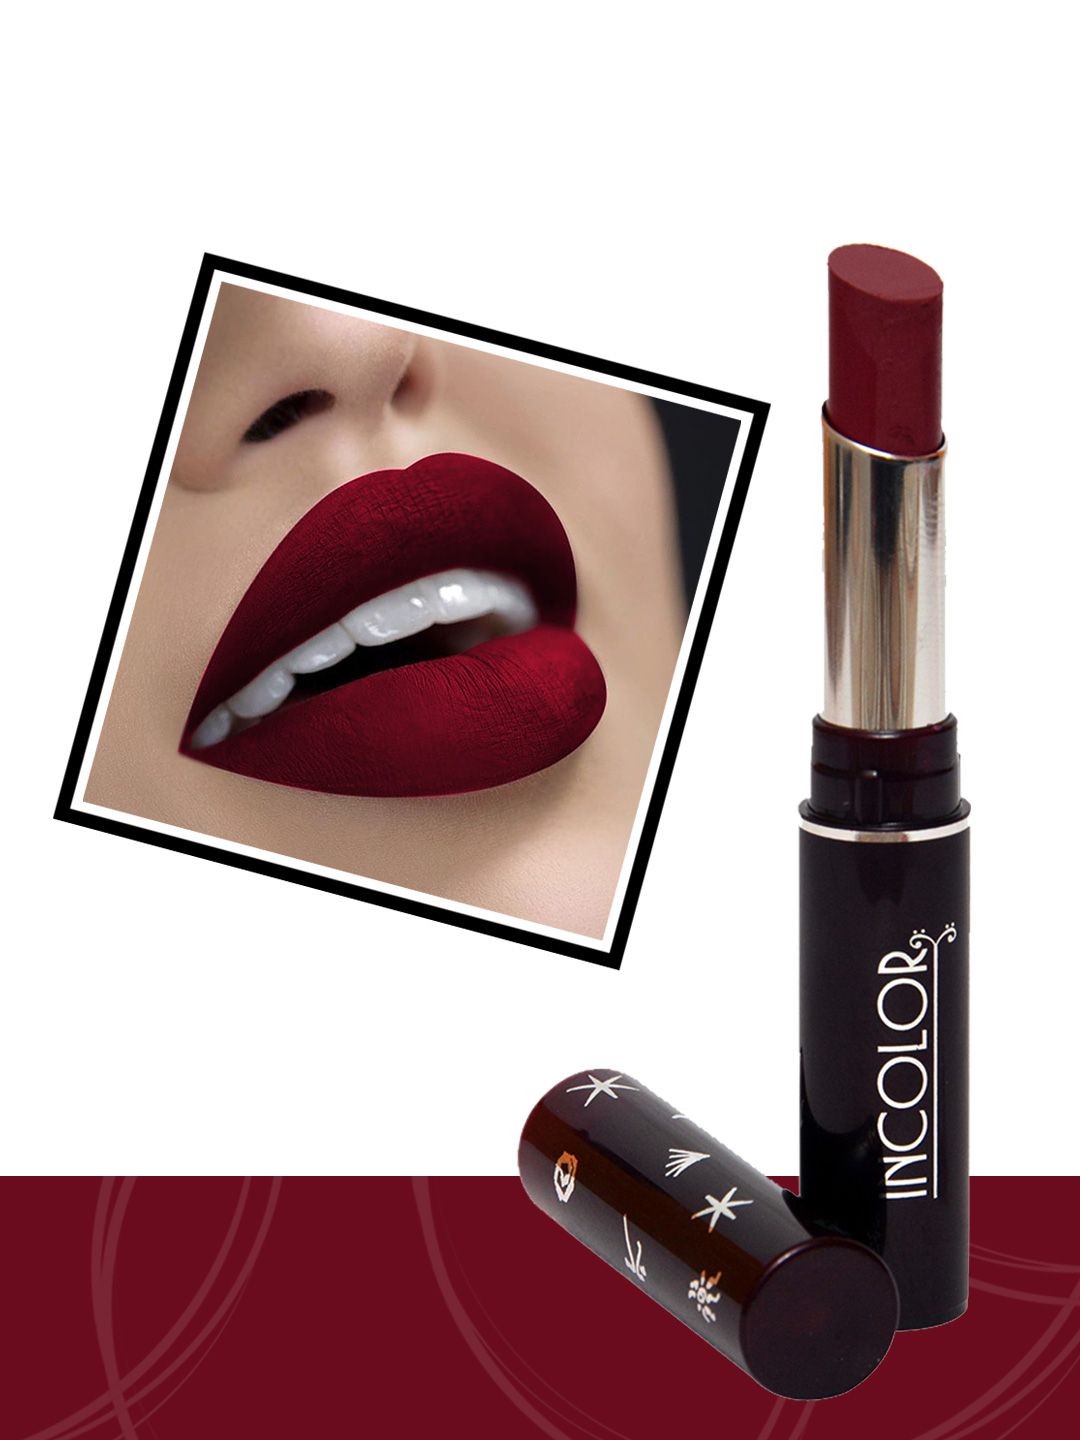 INCOLOR Long Lasting Lipstick - 826 Brown (2.3g) Price in India